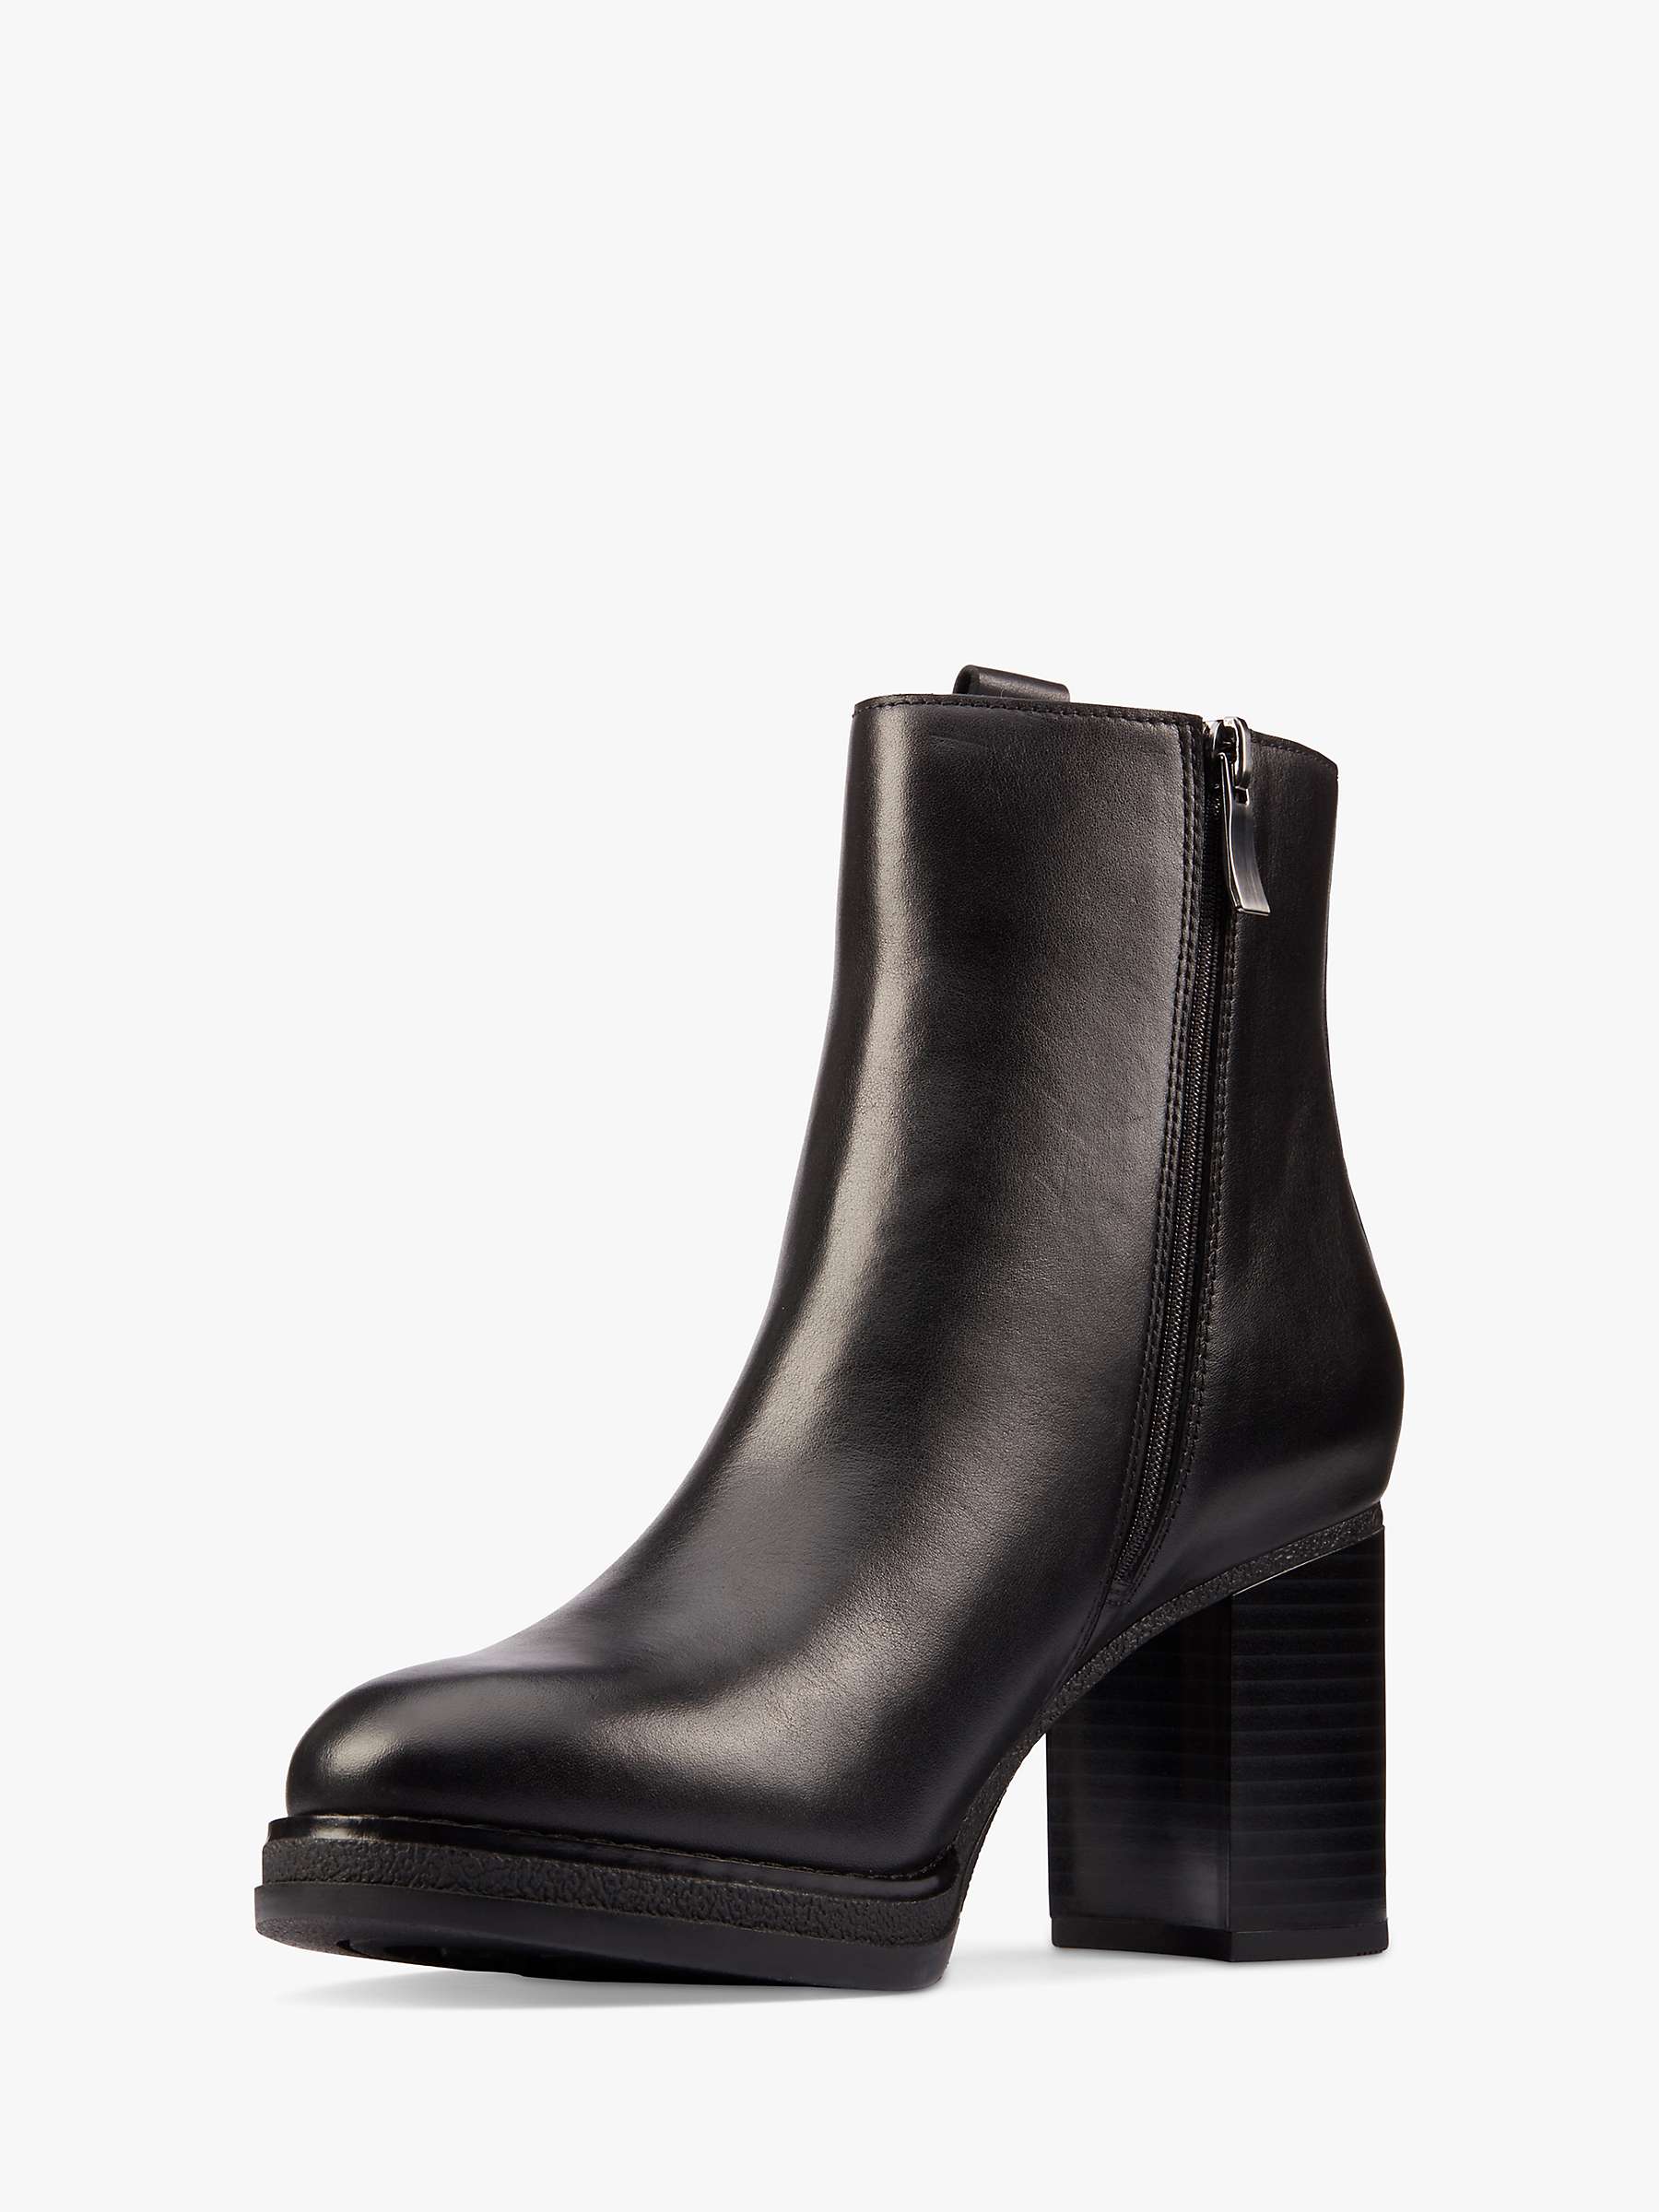 Clarks Mable Easy Leather Ankle Boots, Black at John Lewis & Partners